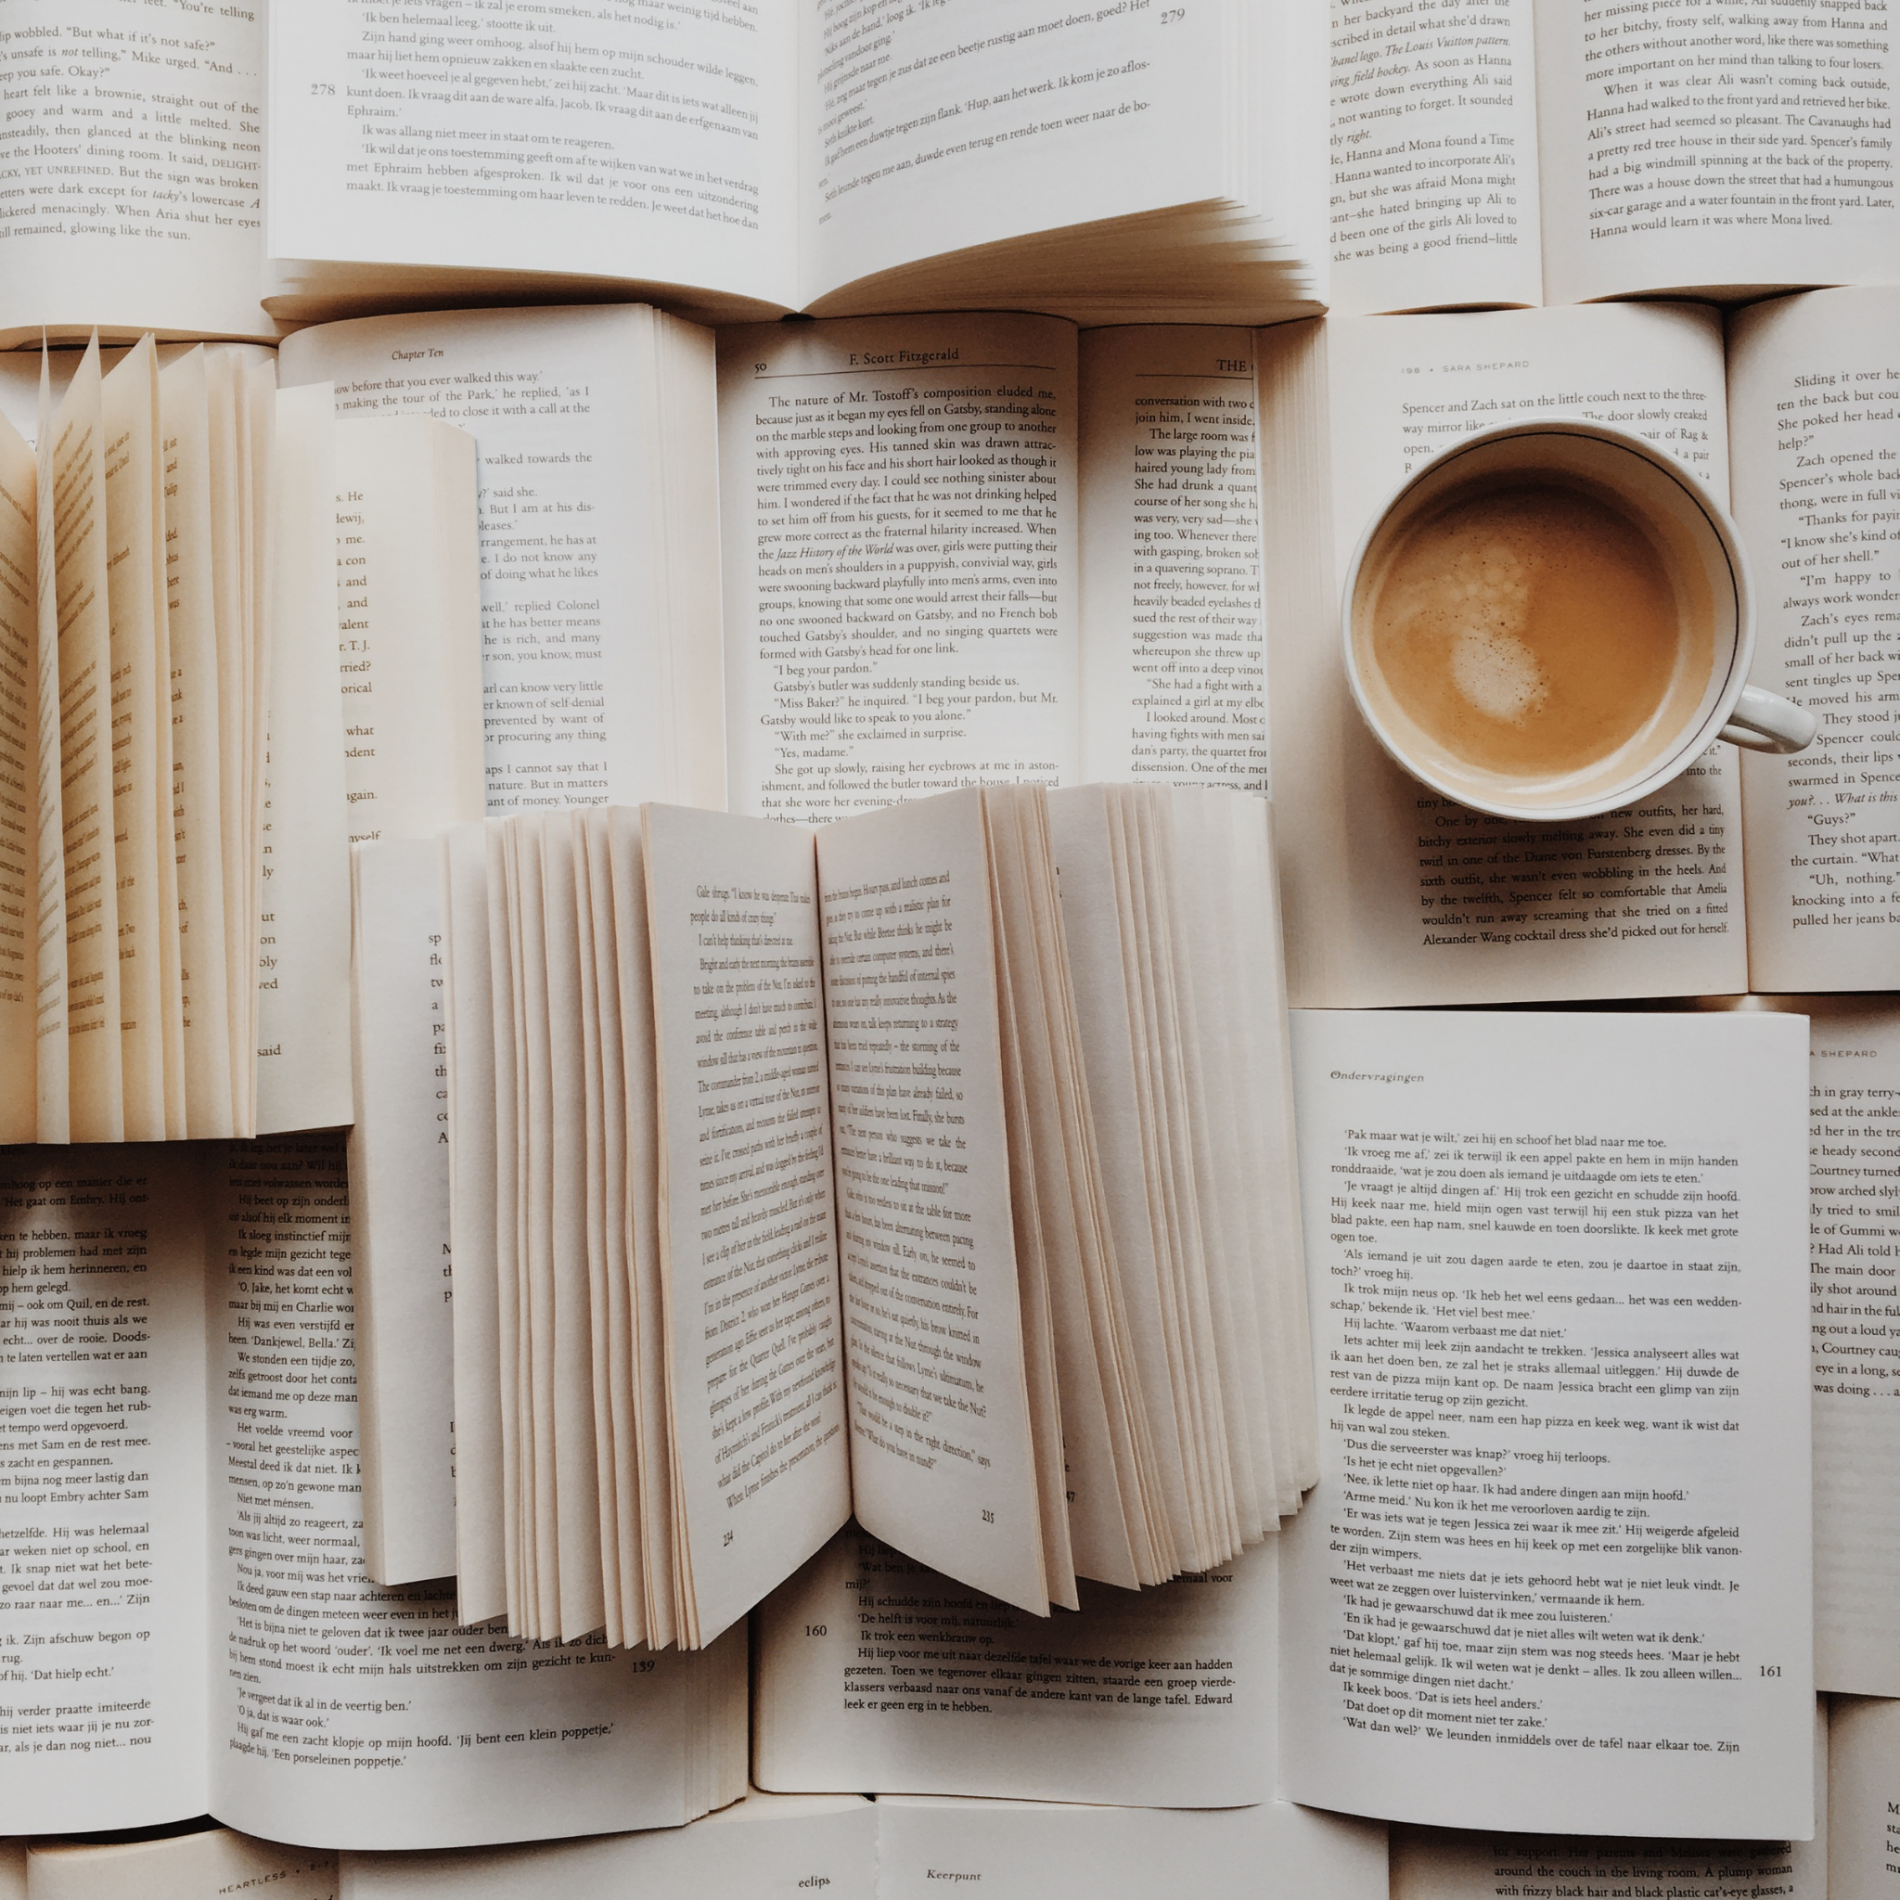 Books and coffee - Stuck in a reading rut - Try these challenges to get out of your literary comfort zone